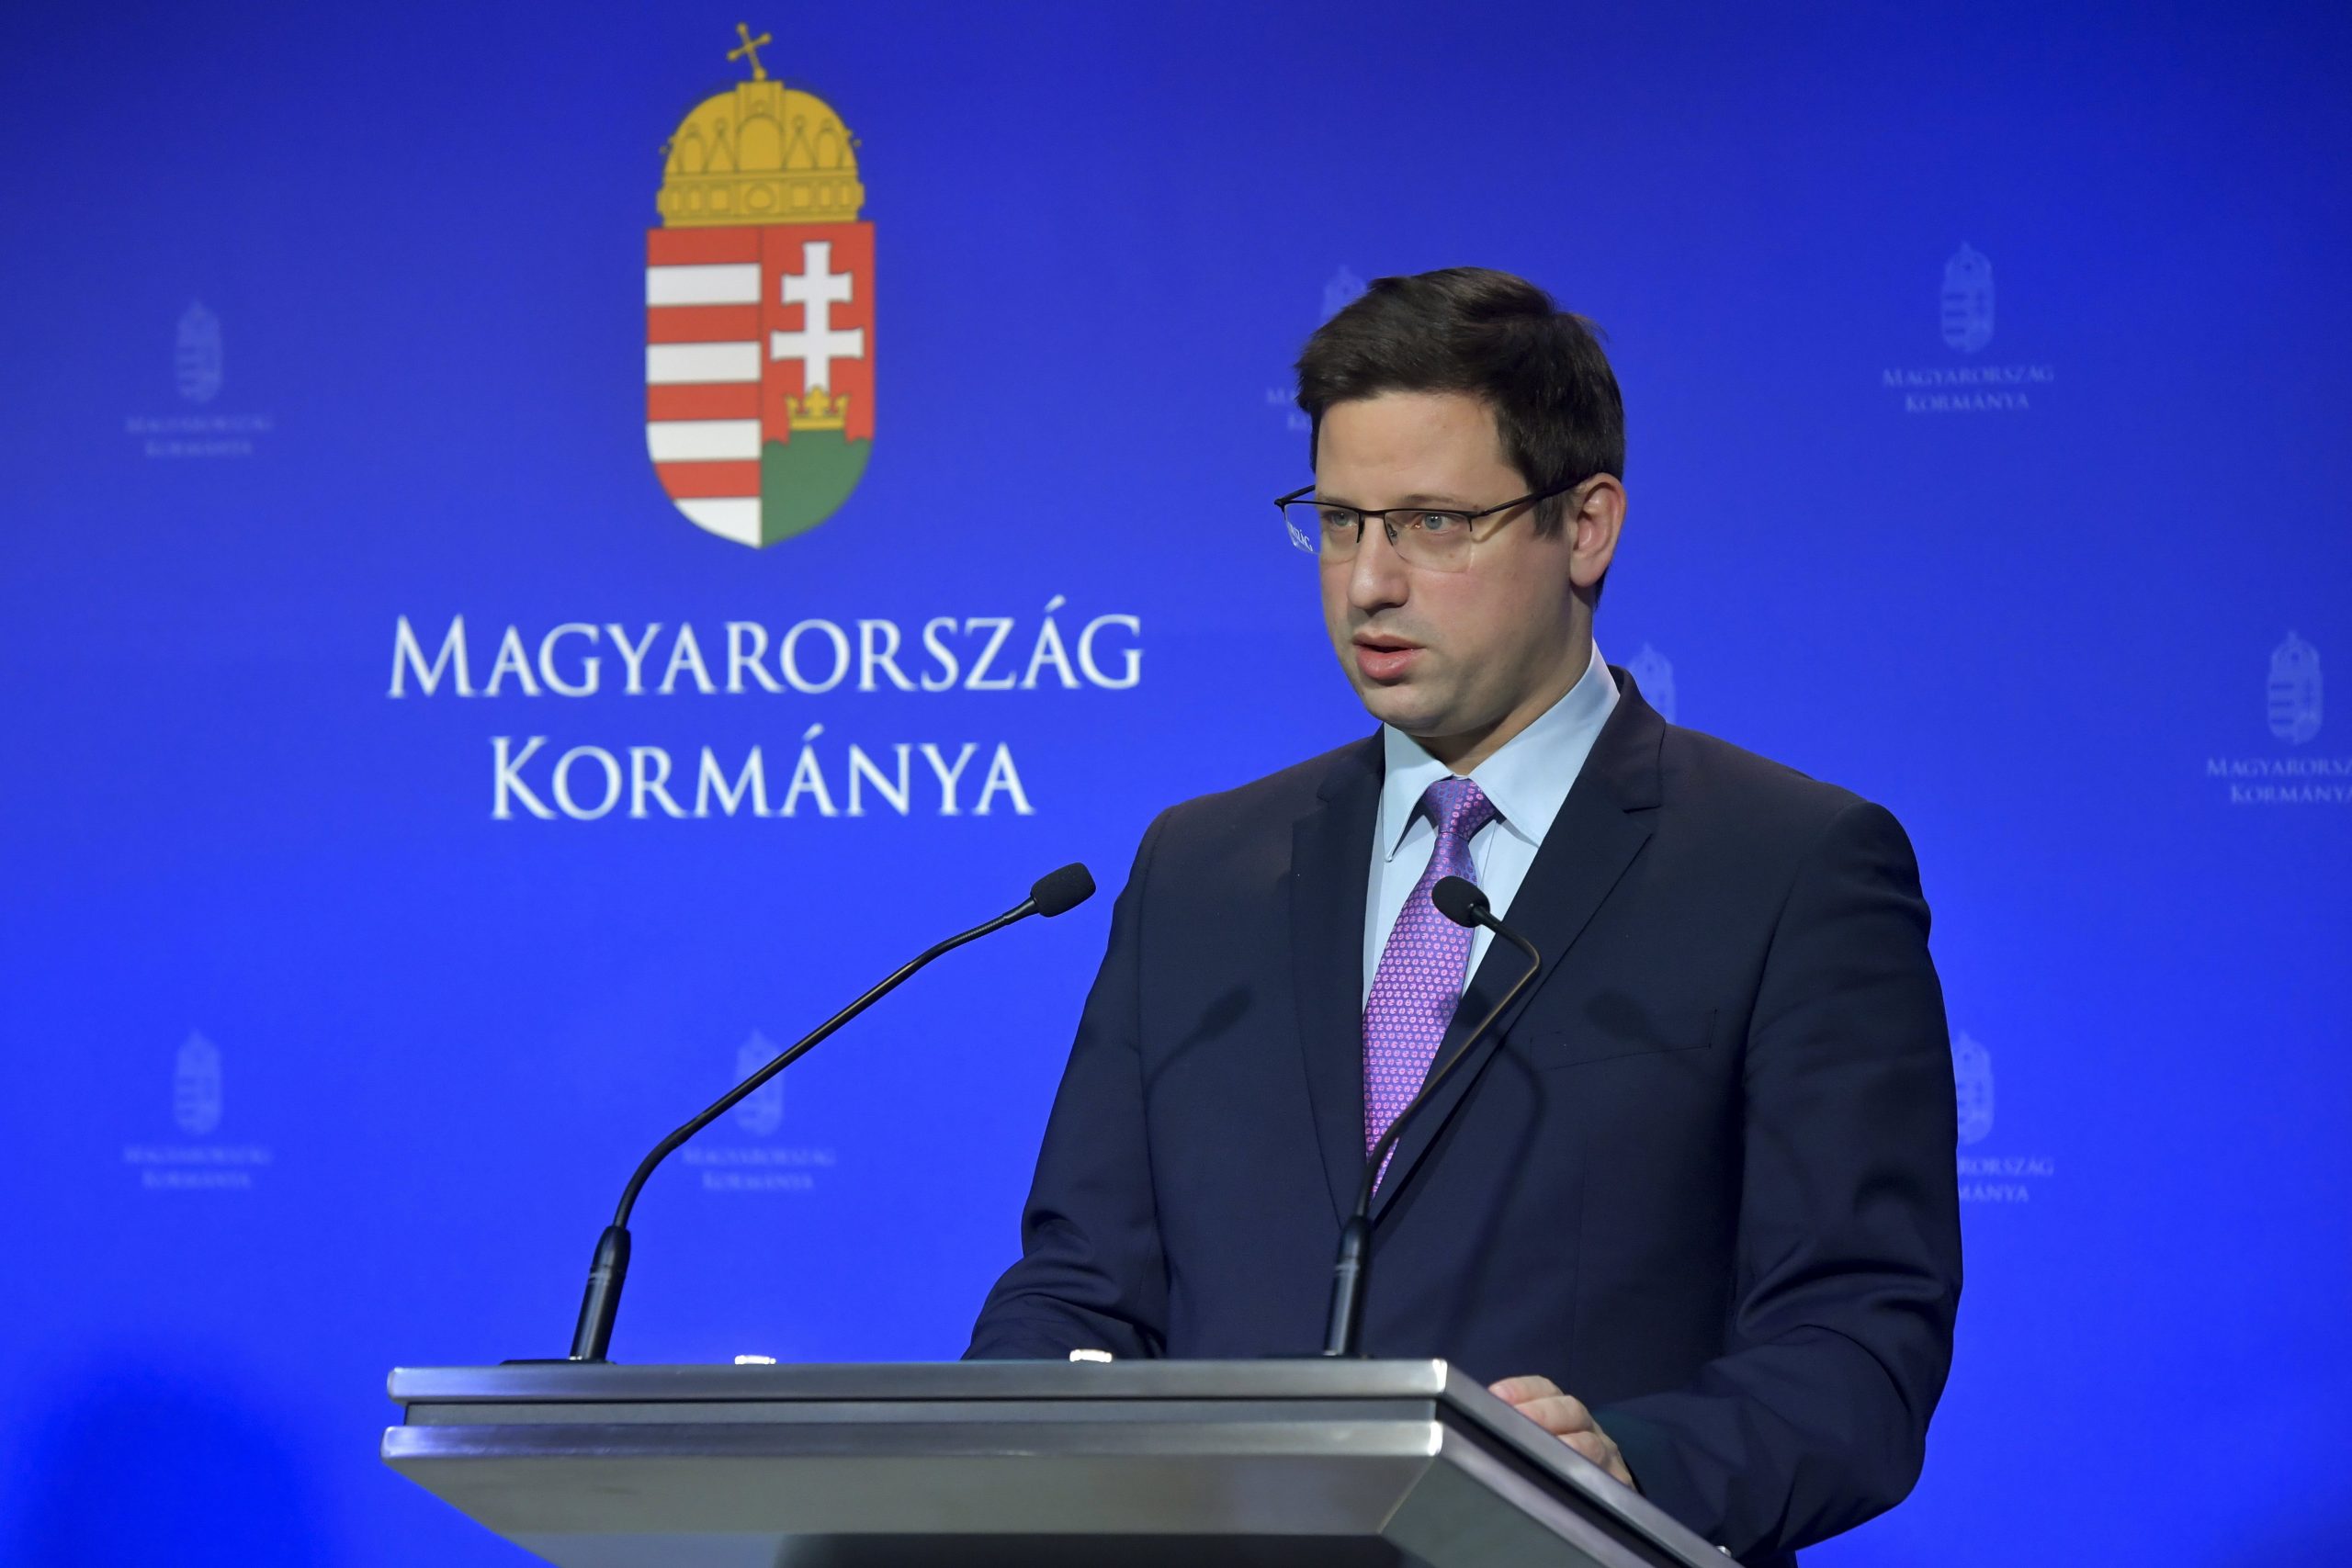 March 15 - PMO Head: 1848/49 Revolution Fought for a Free Hungary